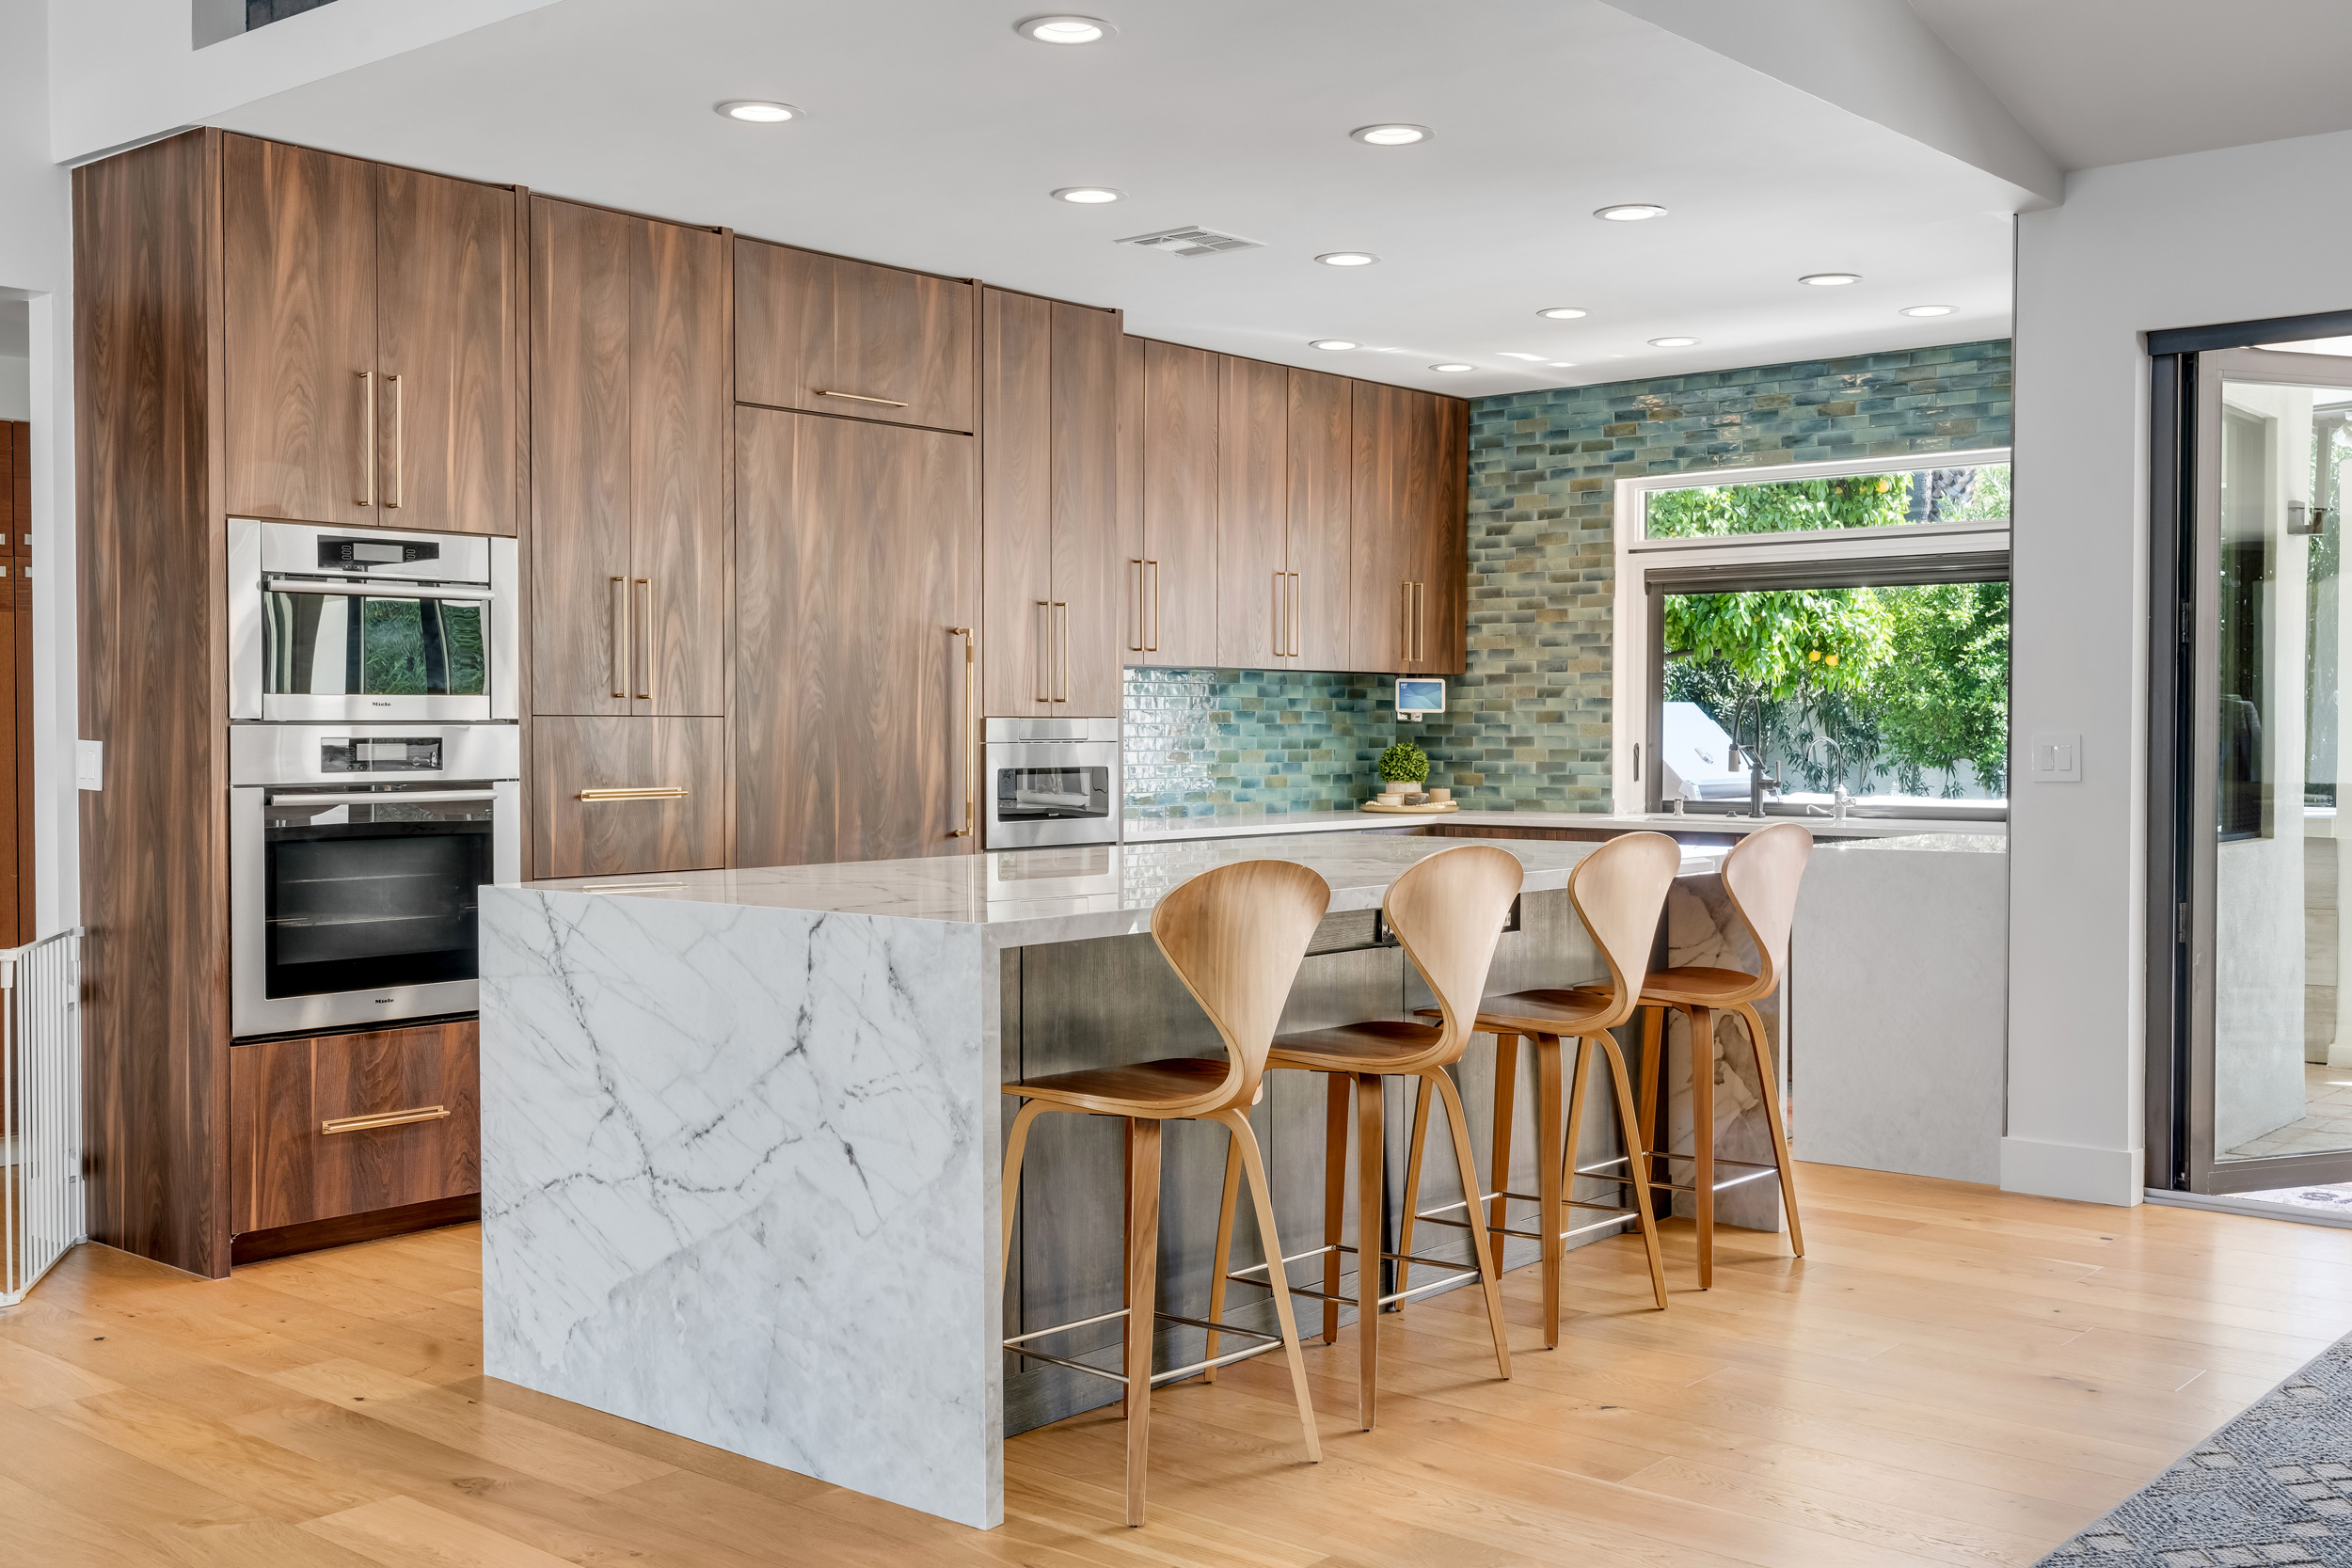 Large-format Porcelain Sintered Stone Countertop in White Patagonia Polished